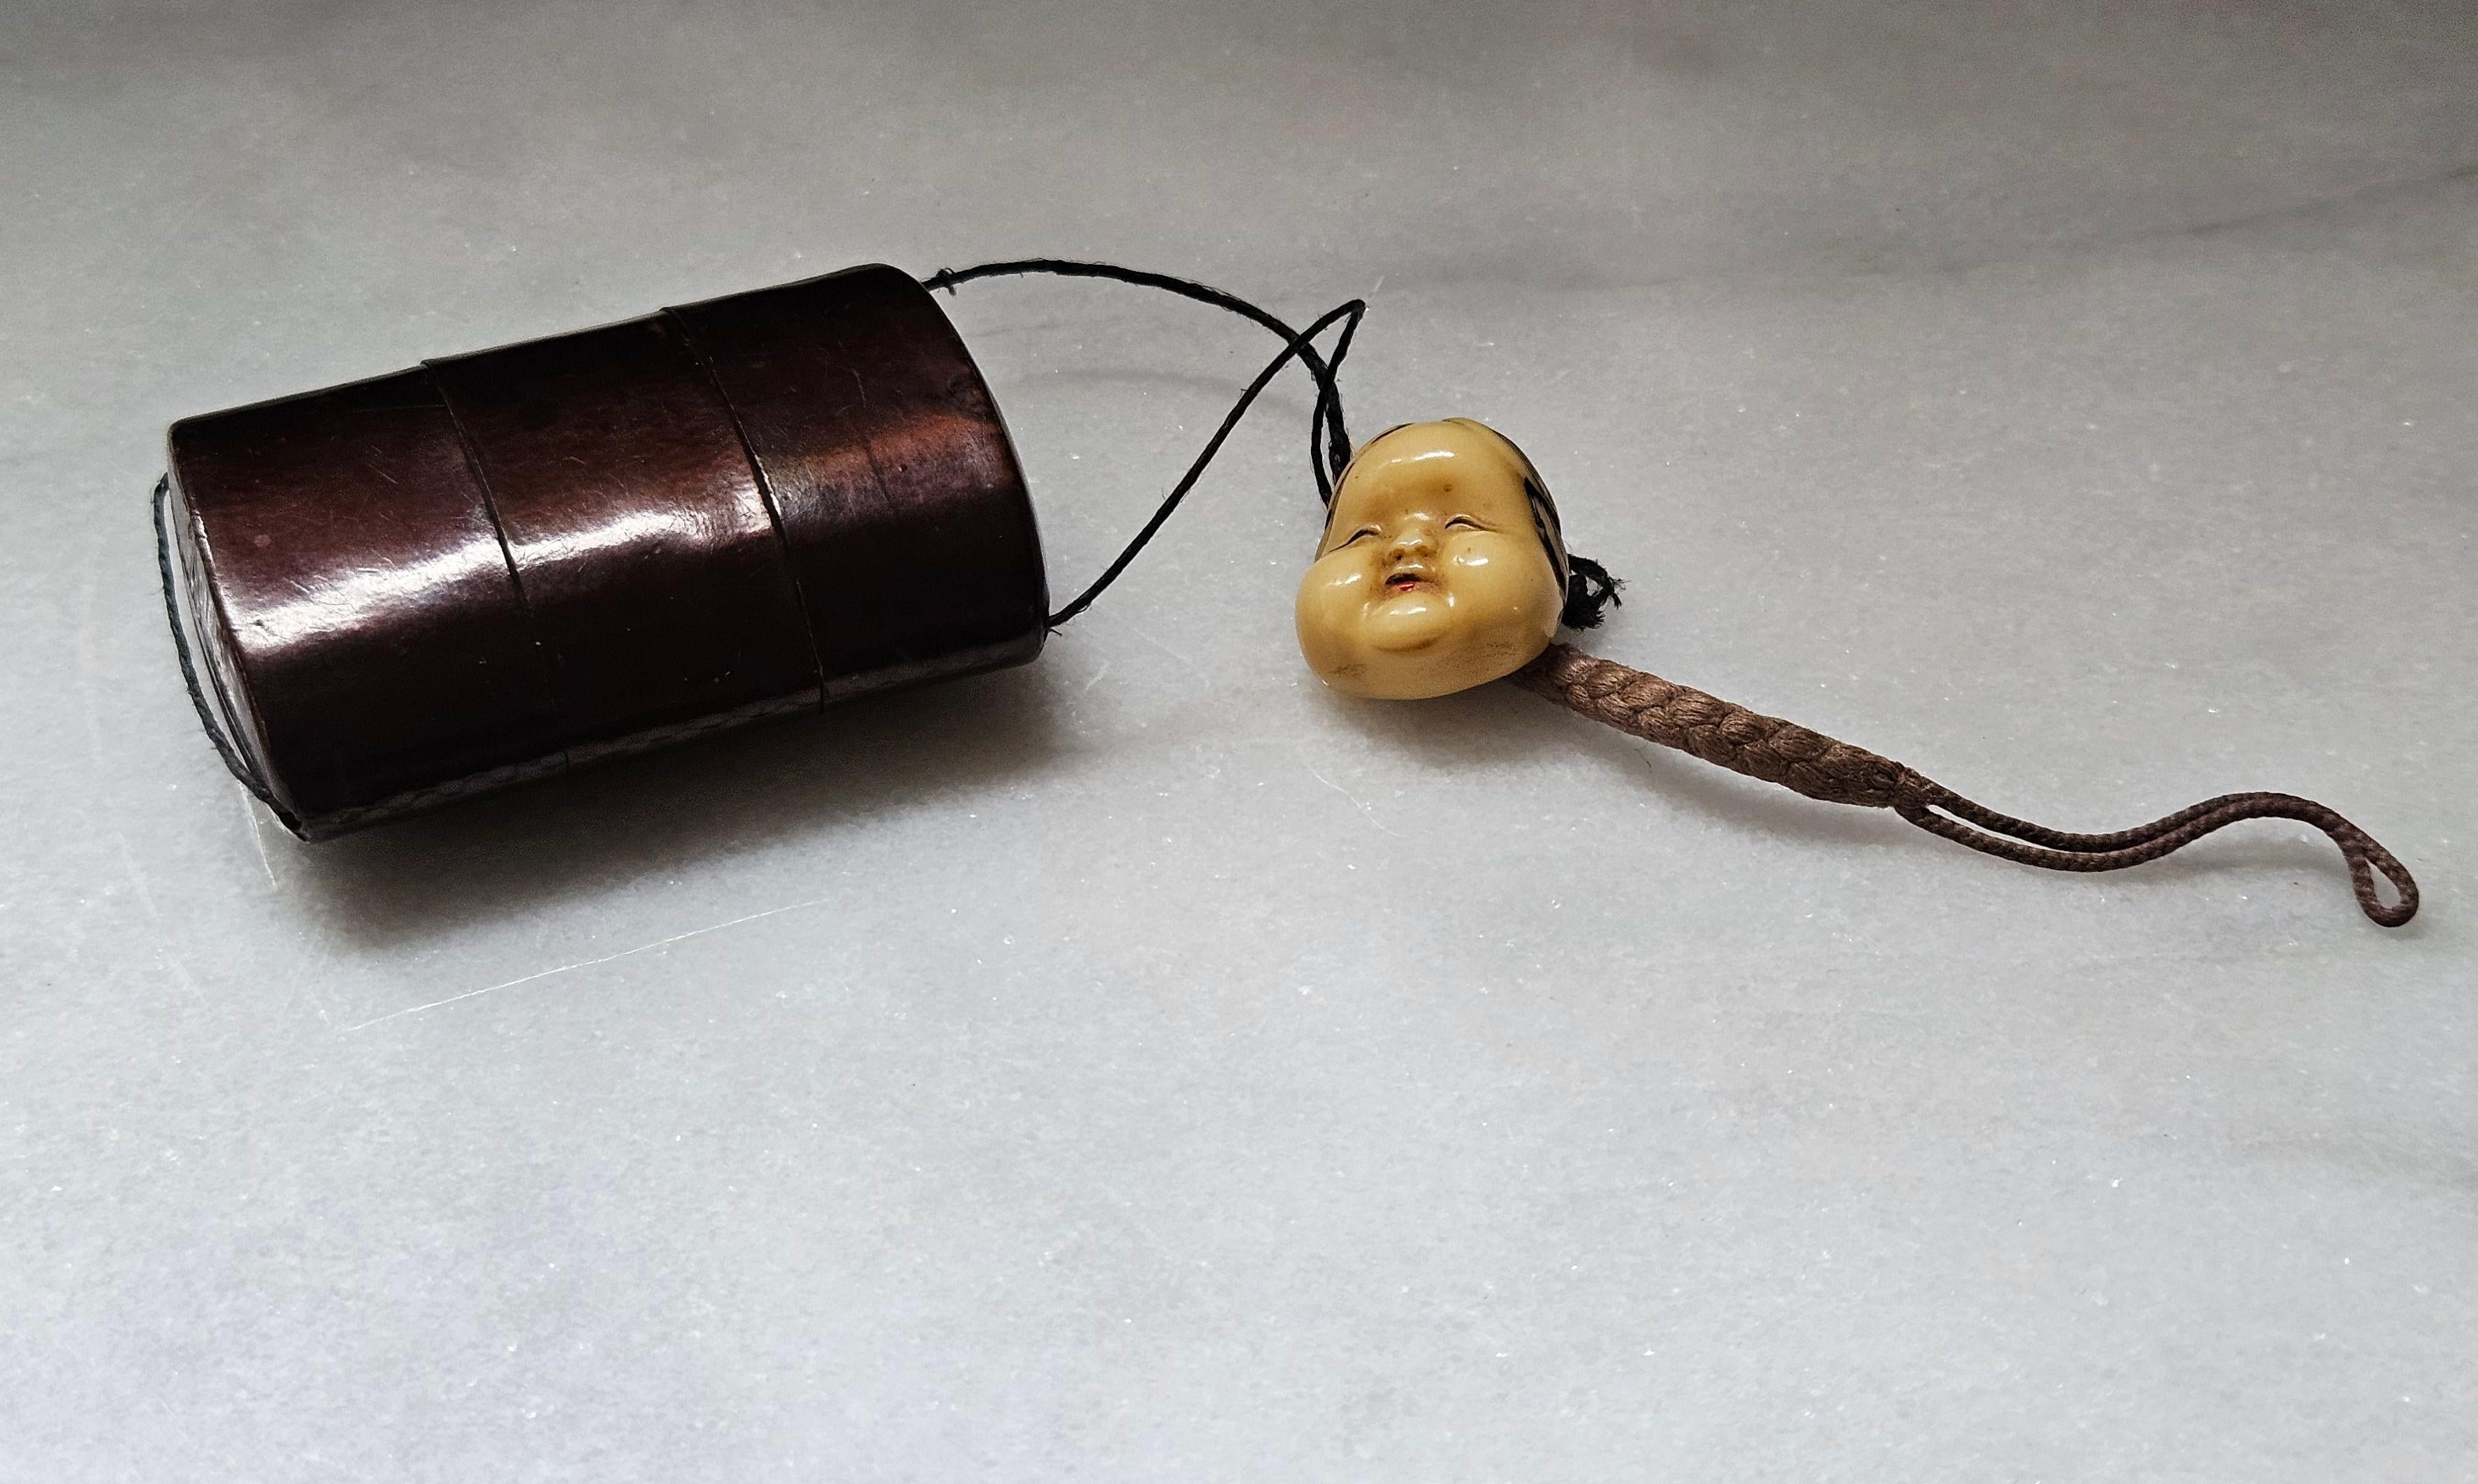 Japanese Lacquer Inro with Netsuke Okame Mask, brown lacquer with 3 sections and 2 compartments, and carved ivory polychrome Okame mask and a rope hair. This item is from the Meiji Period.

Dimension:  
Inro: 1.5